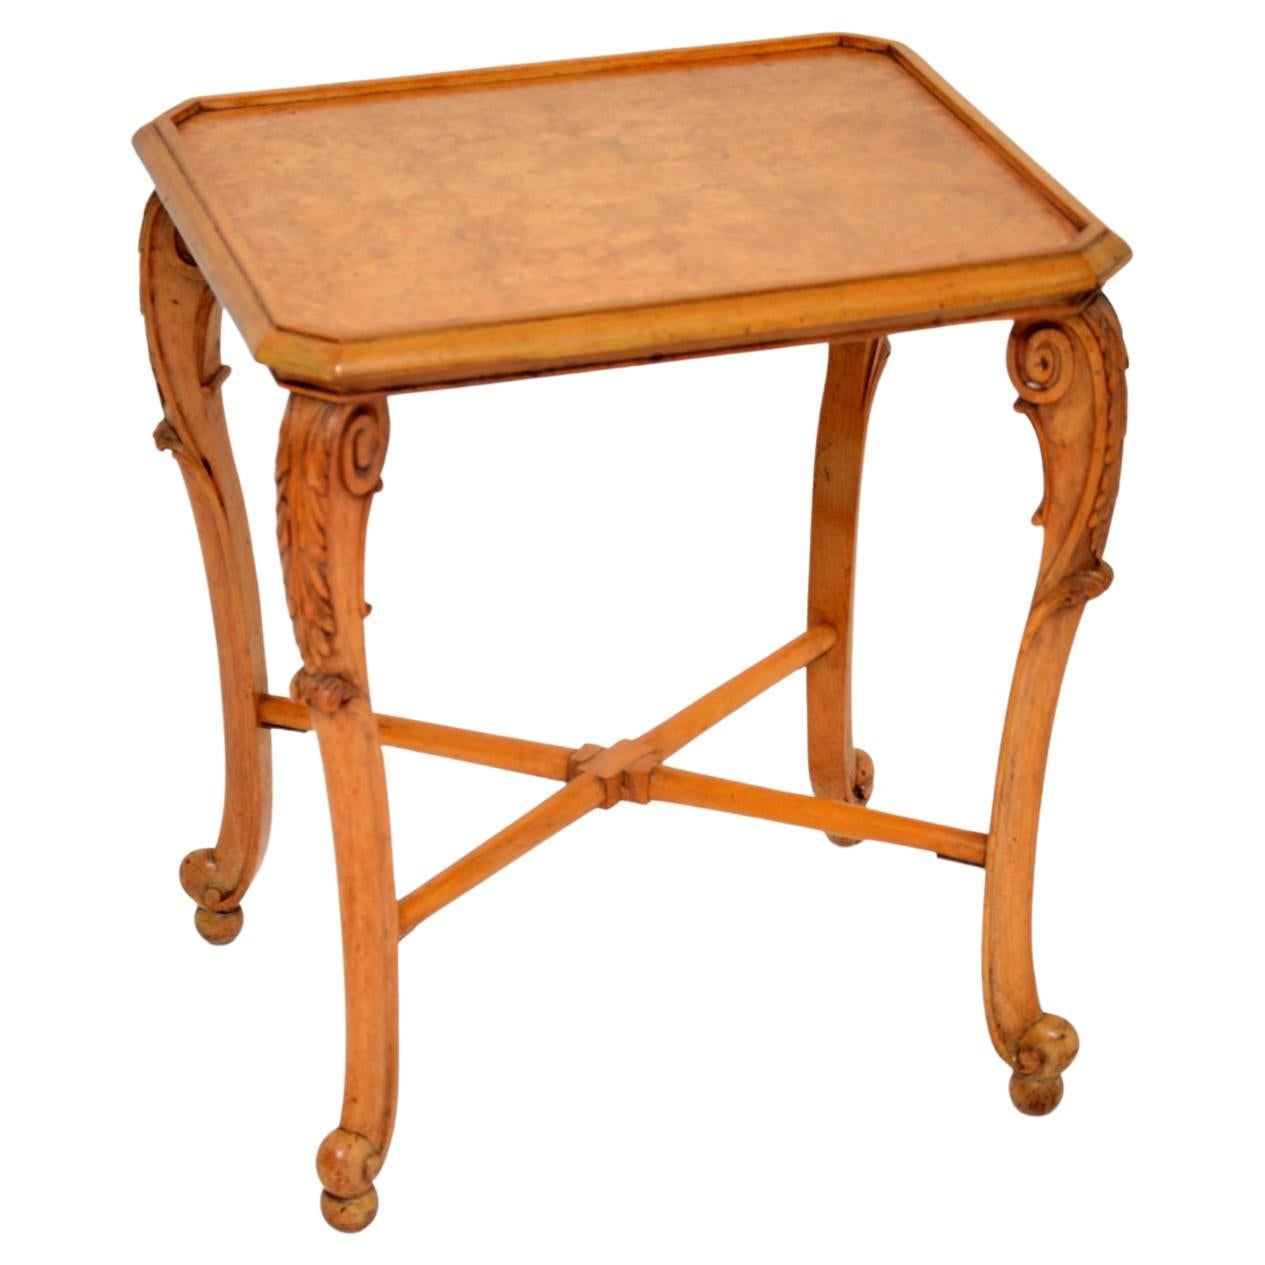 Antique Burr Walnut Side Table by Hille